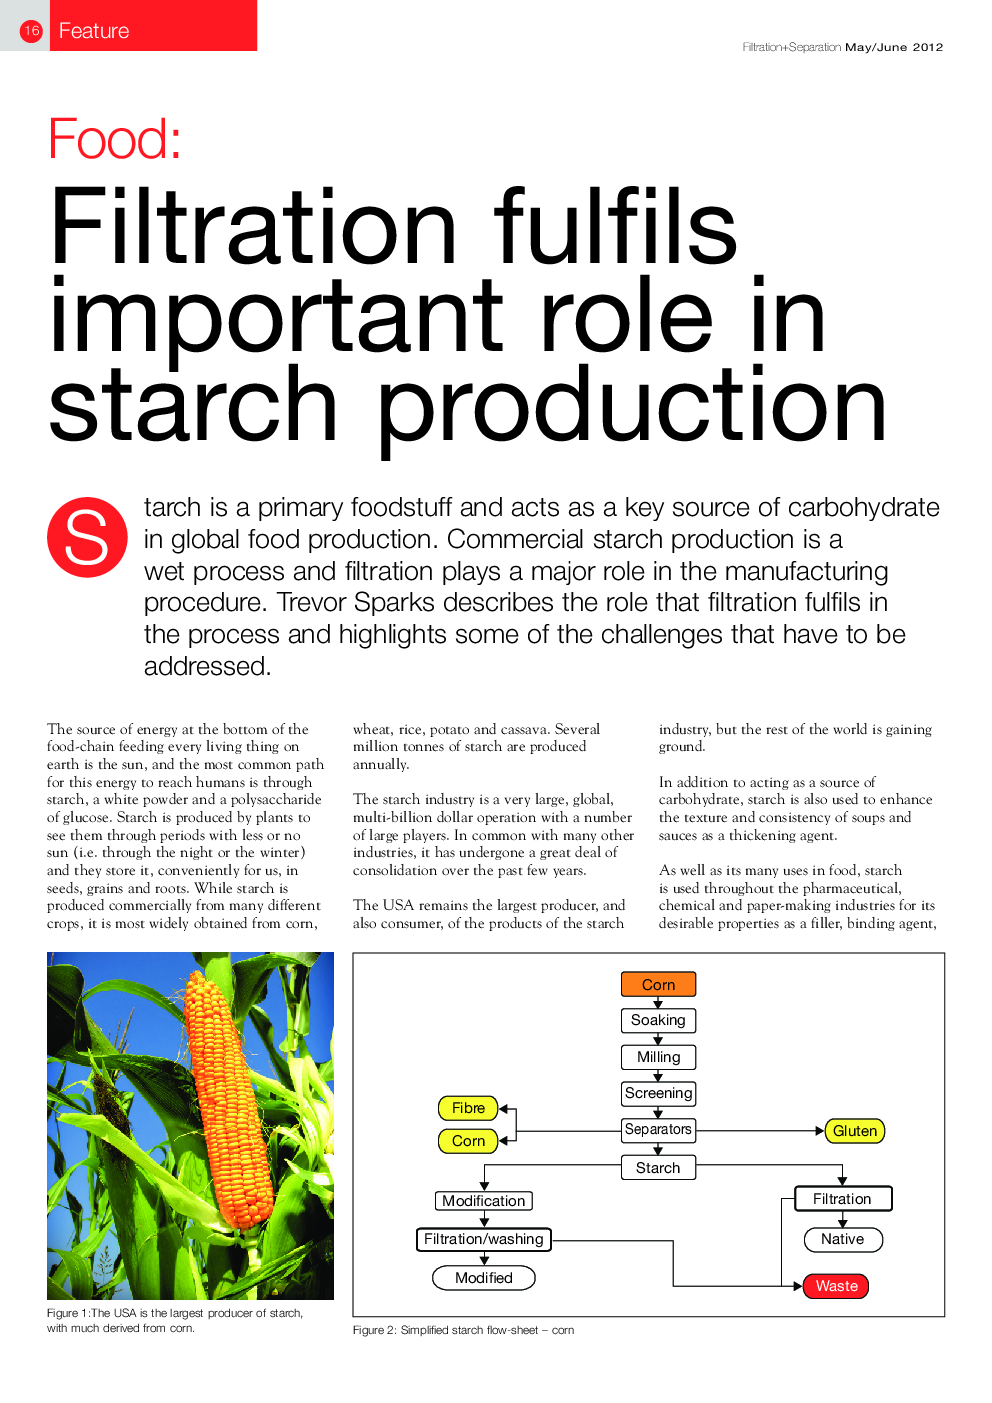 Foods: Filtration fulfils important role in starch production